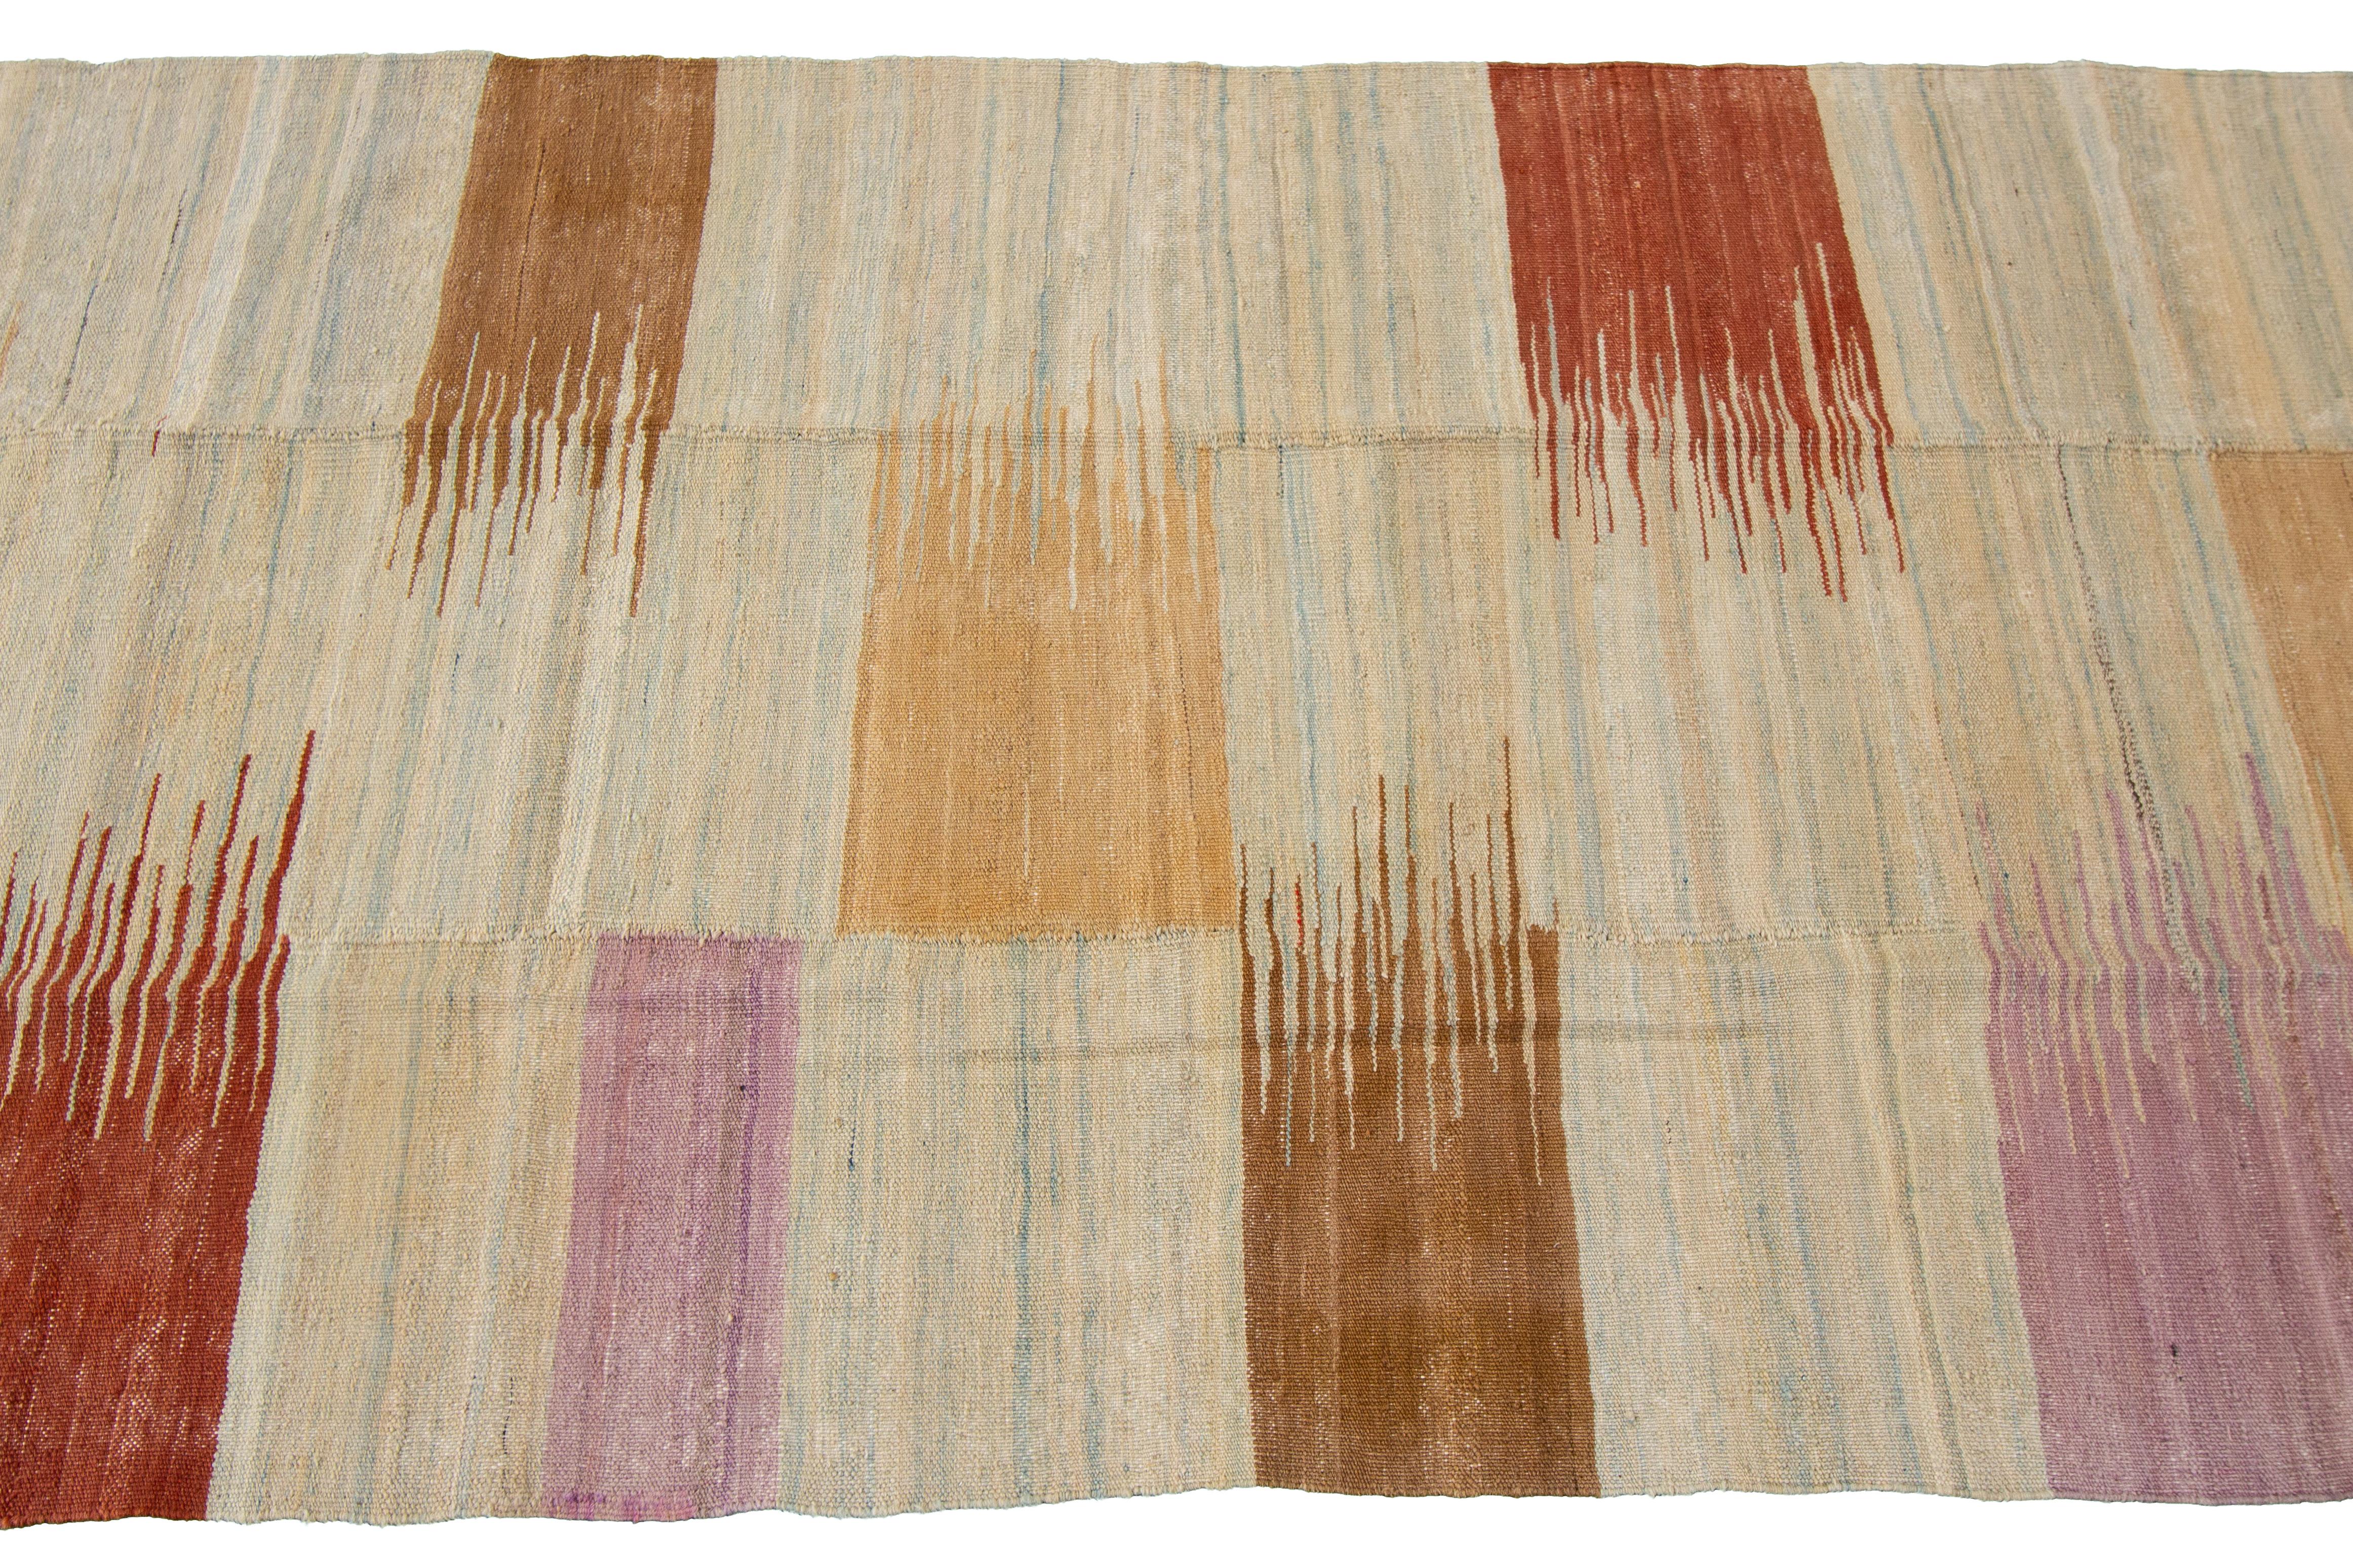 A hand-knotted modern Kilim rug with a geometric design. This rug measures 3'3